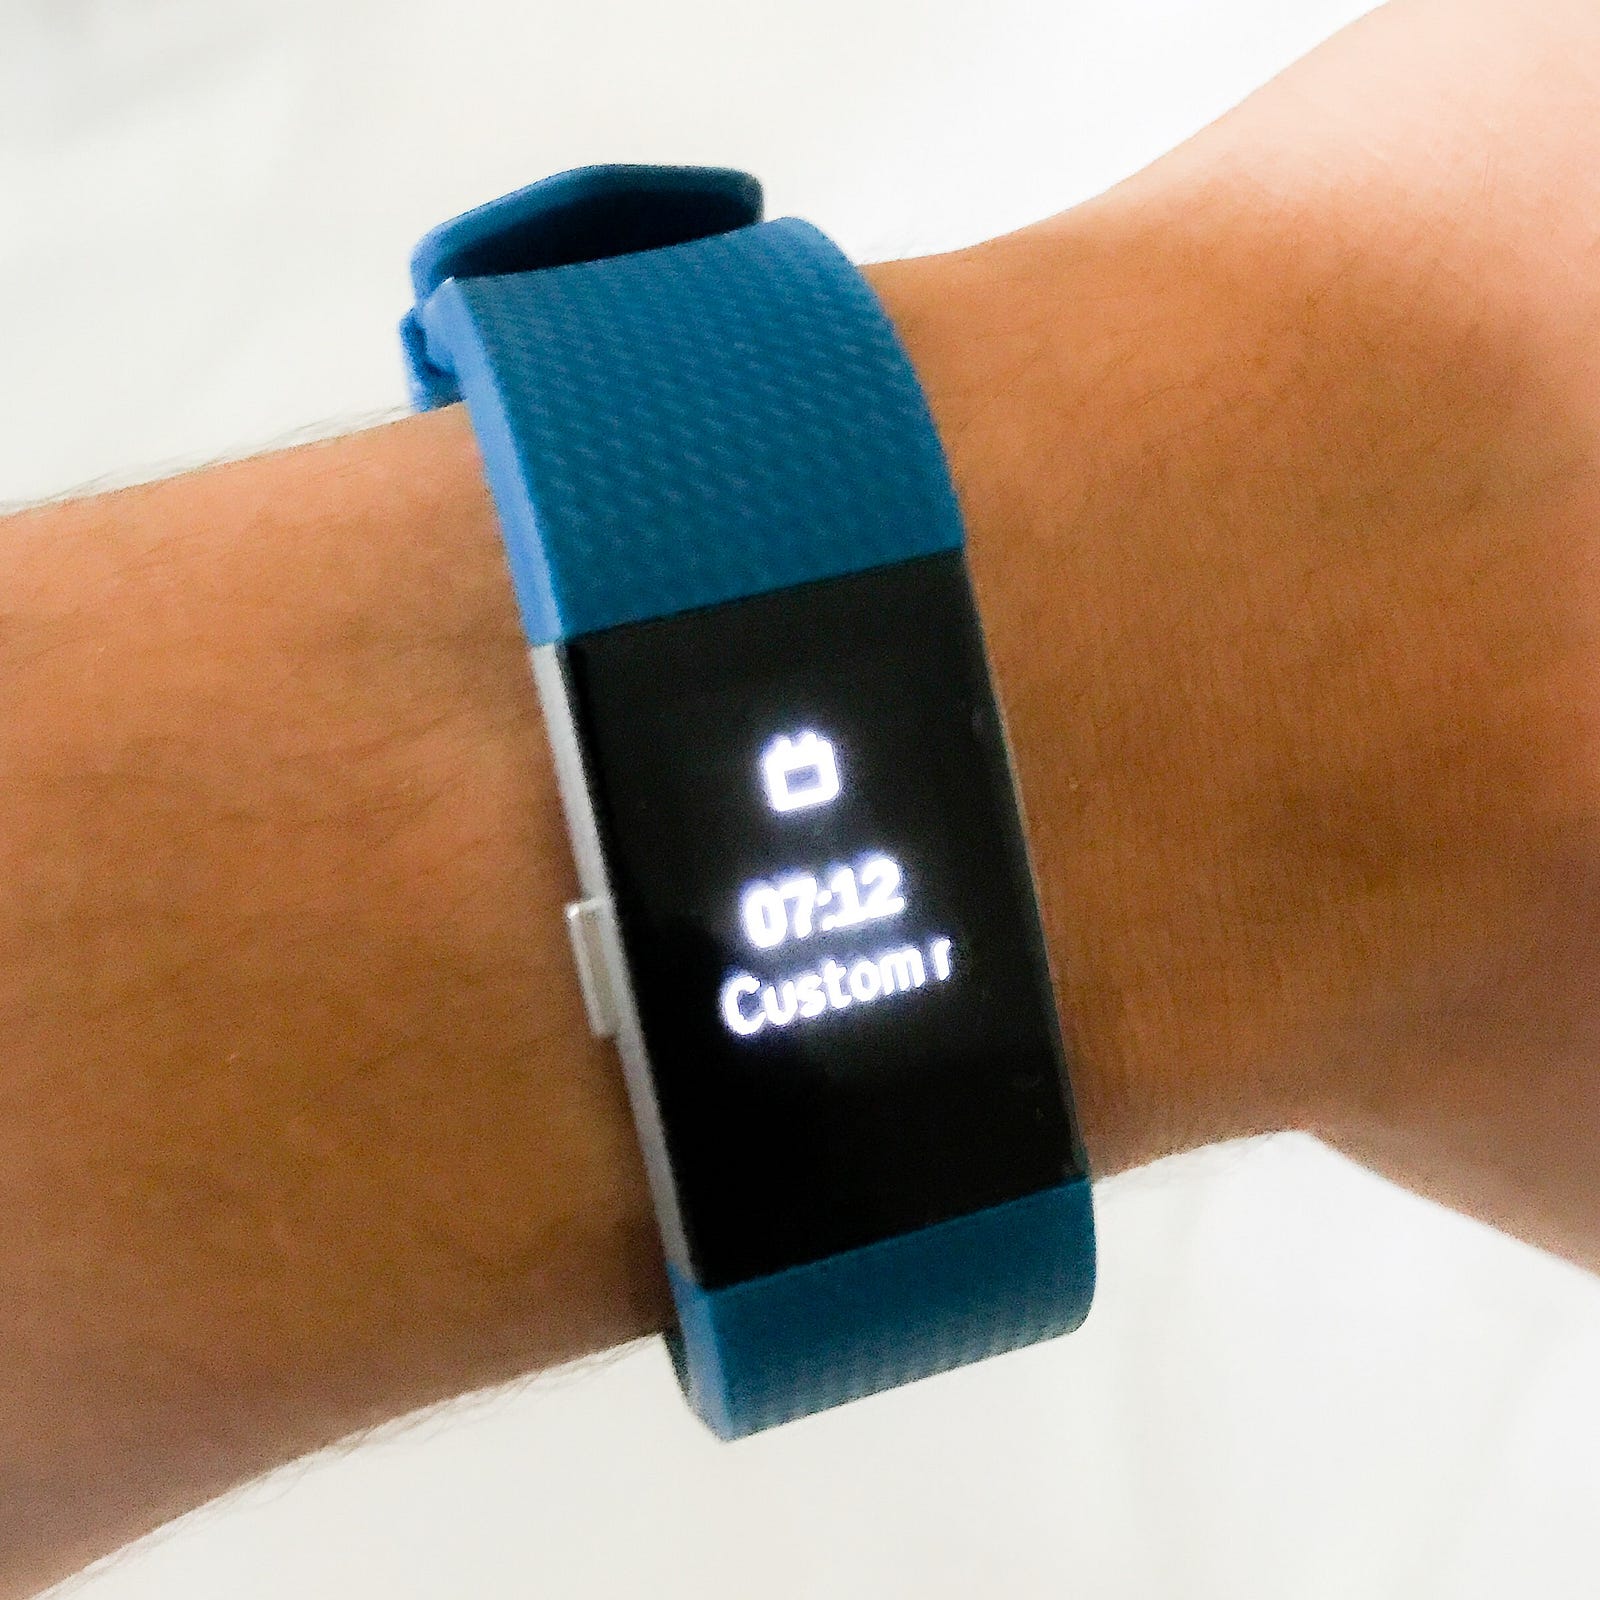 Finally, custom push notifications on Fitbit wearables without hacking